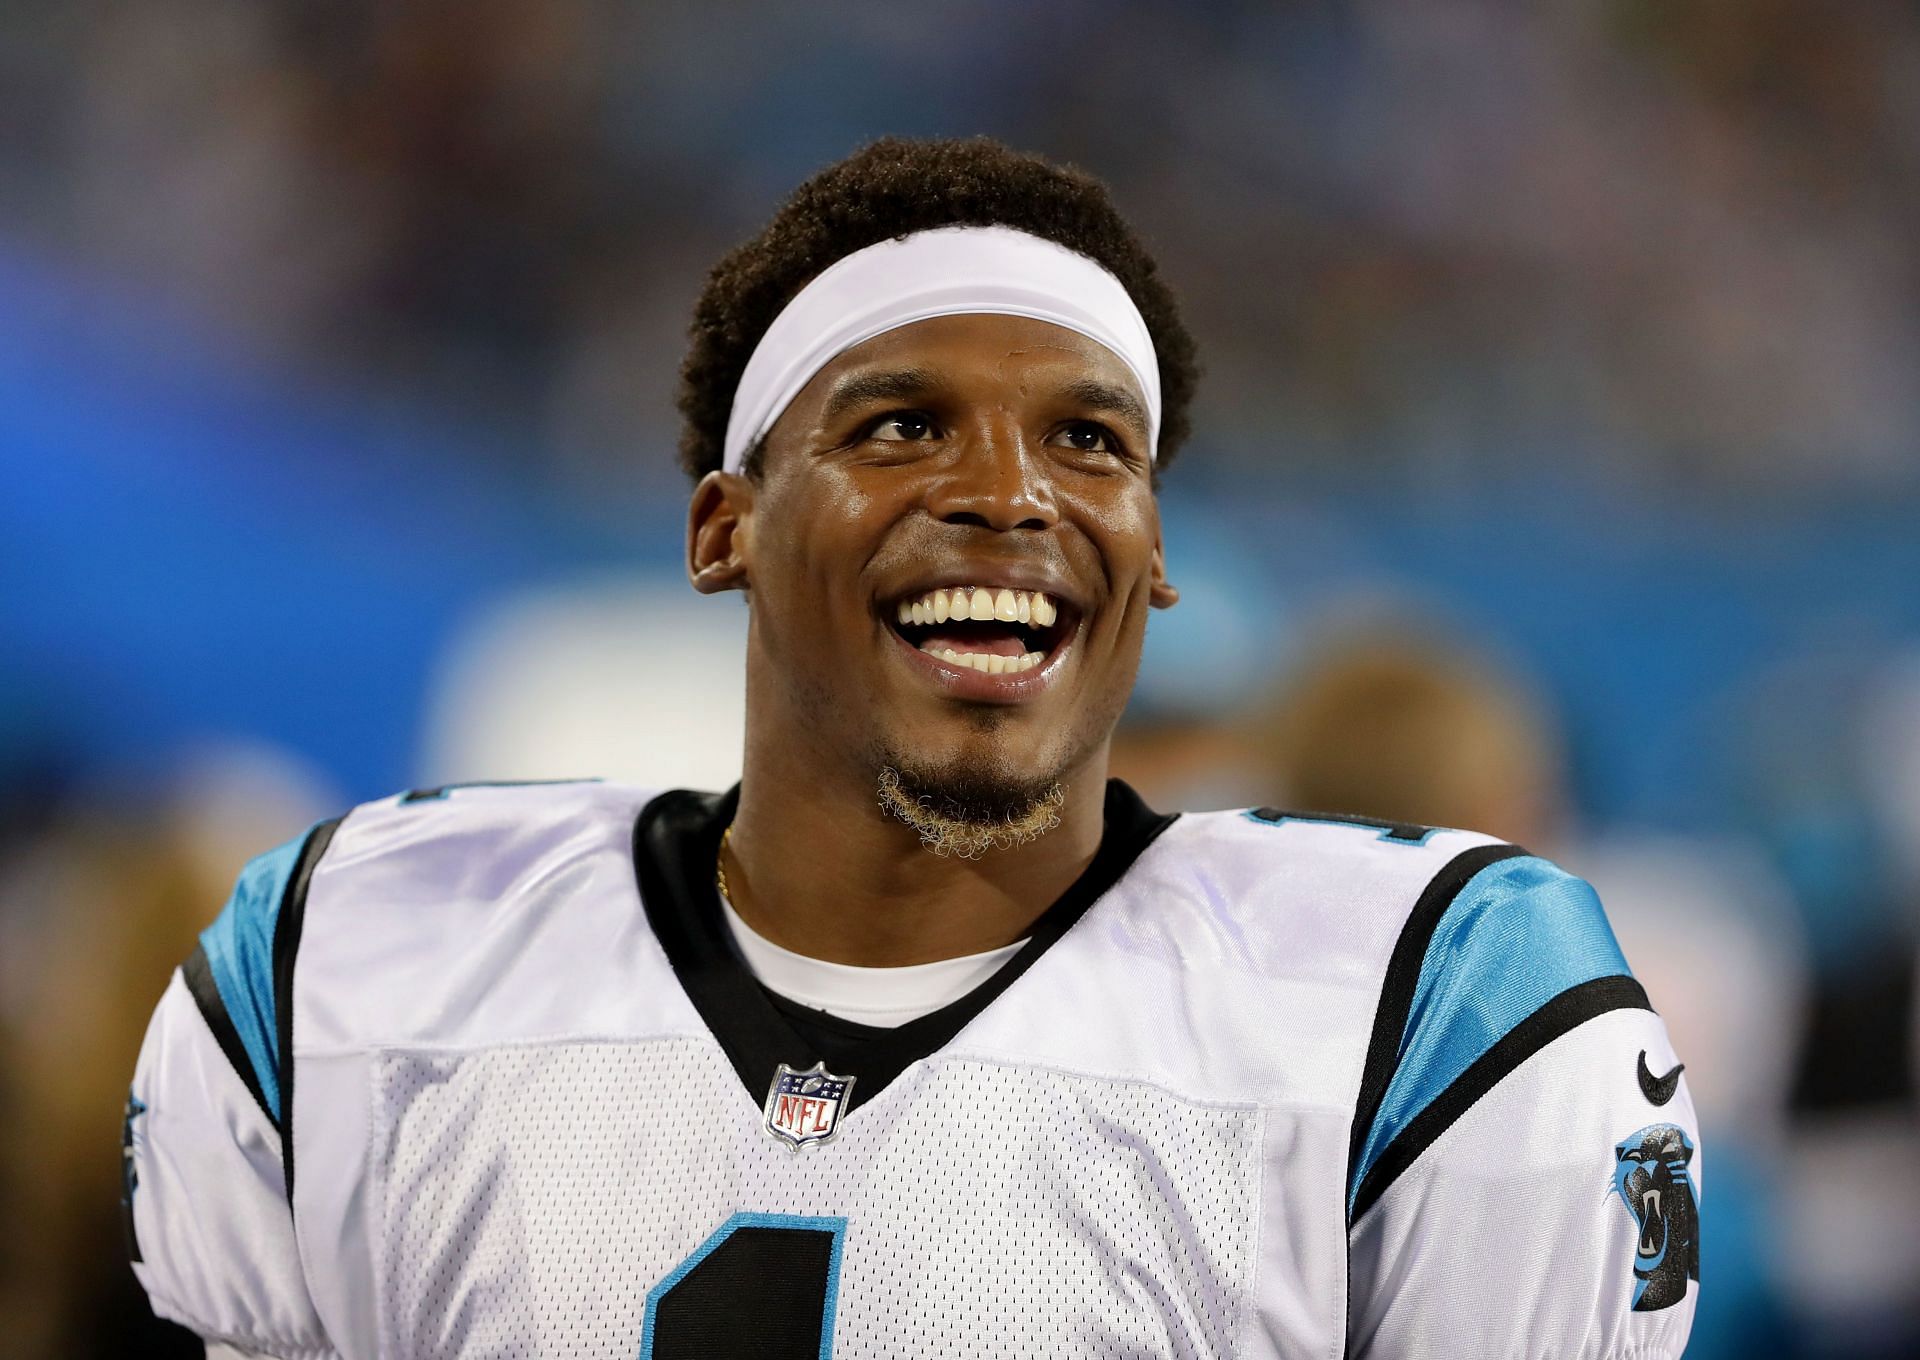 Newton smiles on the sidelines during a 2017 preseason game (Photo: Getty)